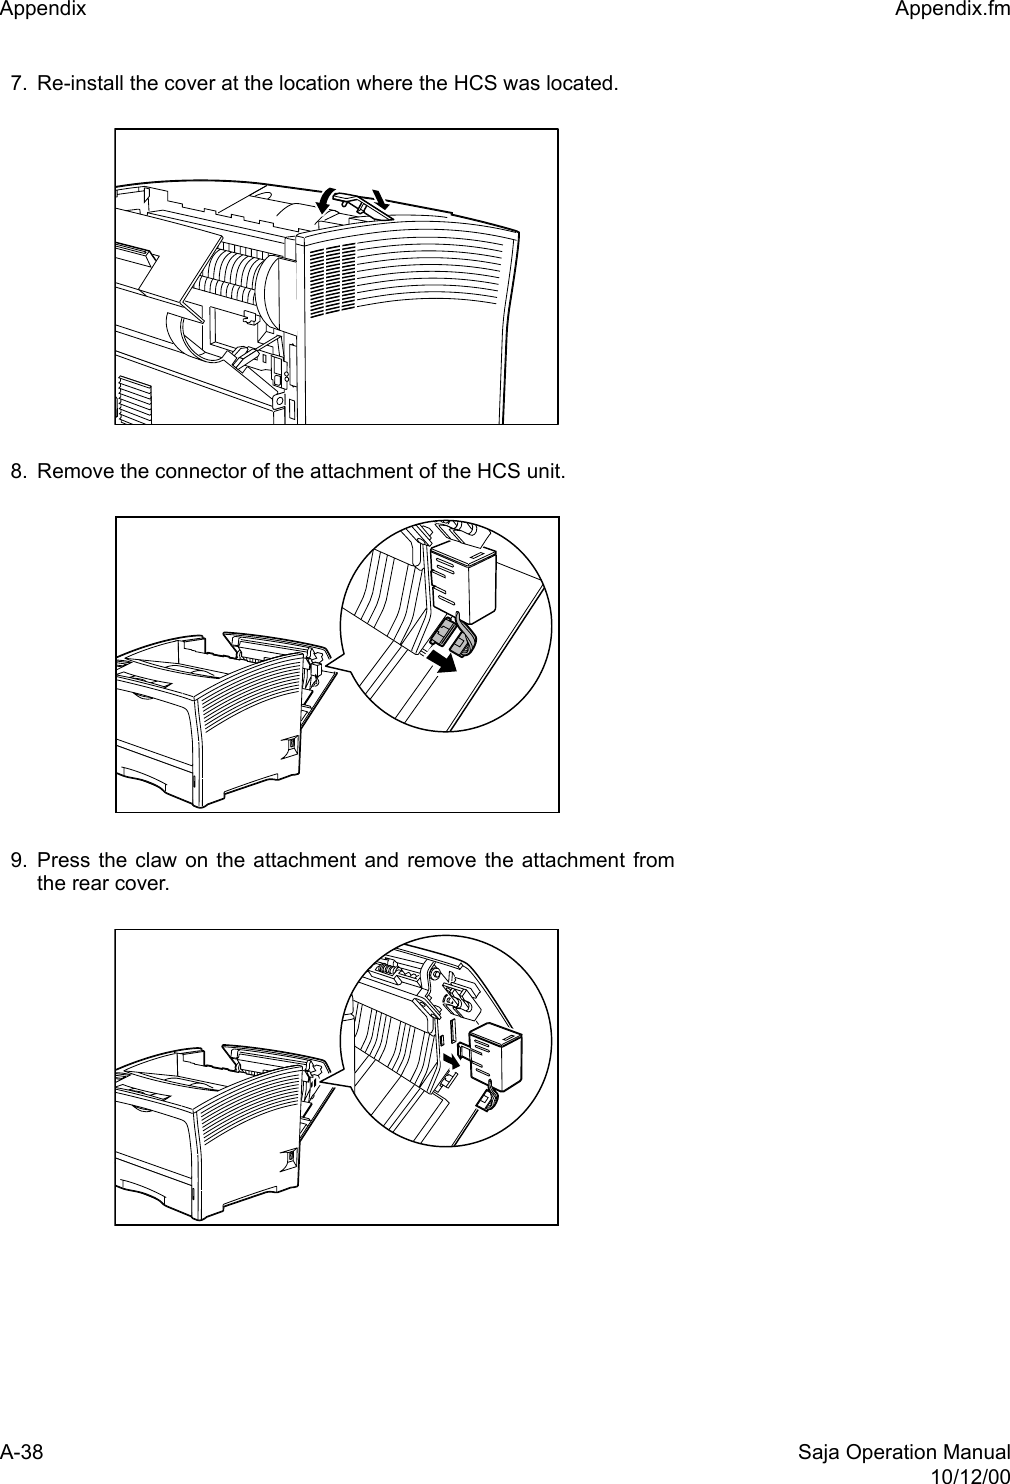 A-38 Saja Operation Manual10/12/00Appendix  Appendix.fm7. Re-install the cover at the location where the HCS was located.8. Remove the connector of the attachment of the HCS unit.9. Press the claw on the attachment and remove the attachment fromthe rear cover.